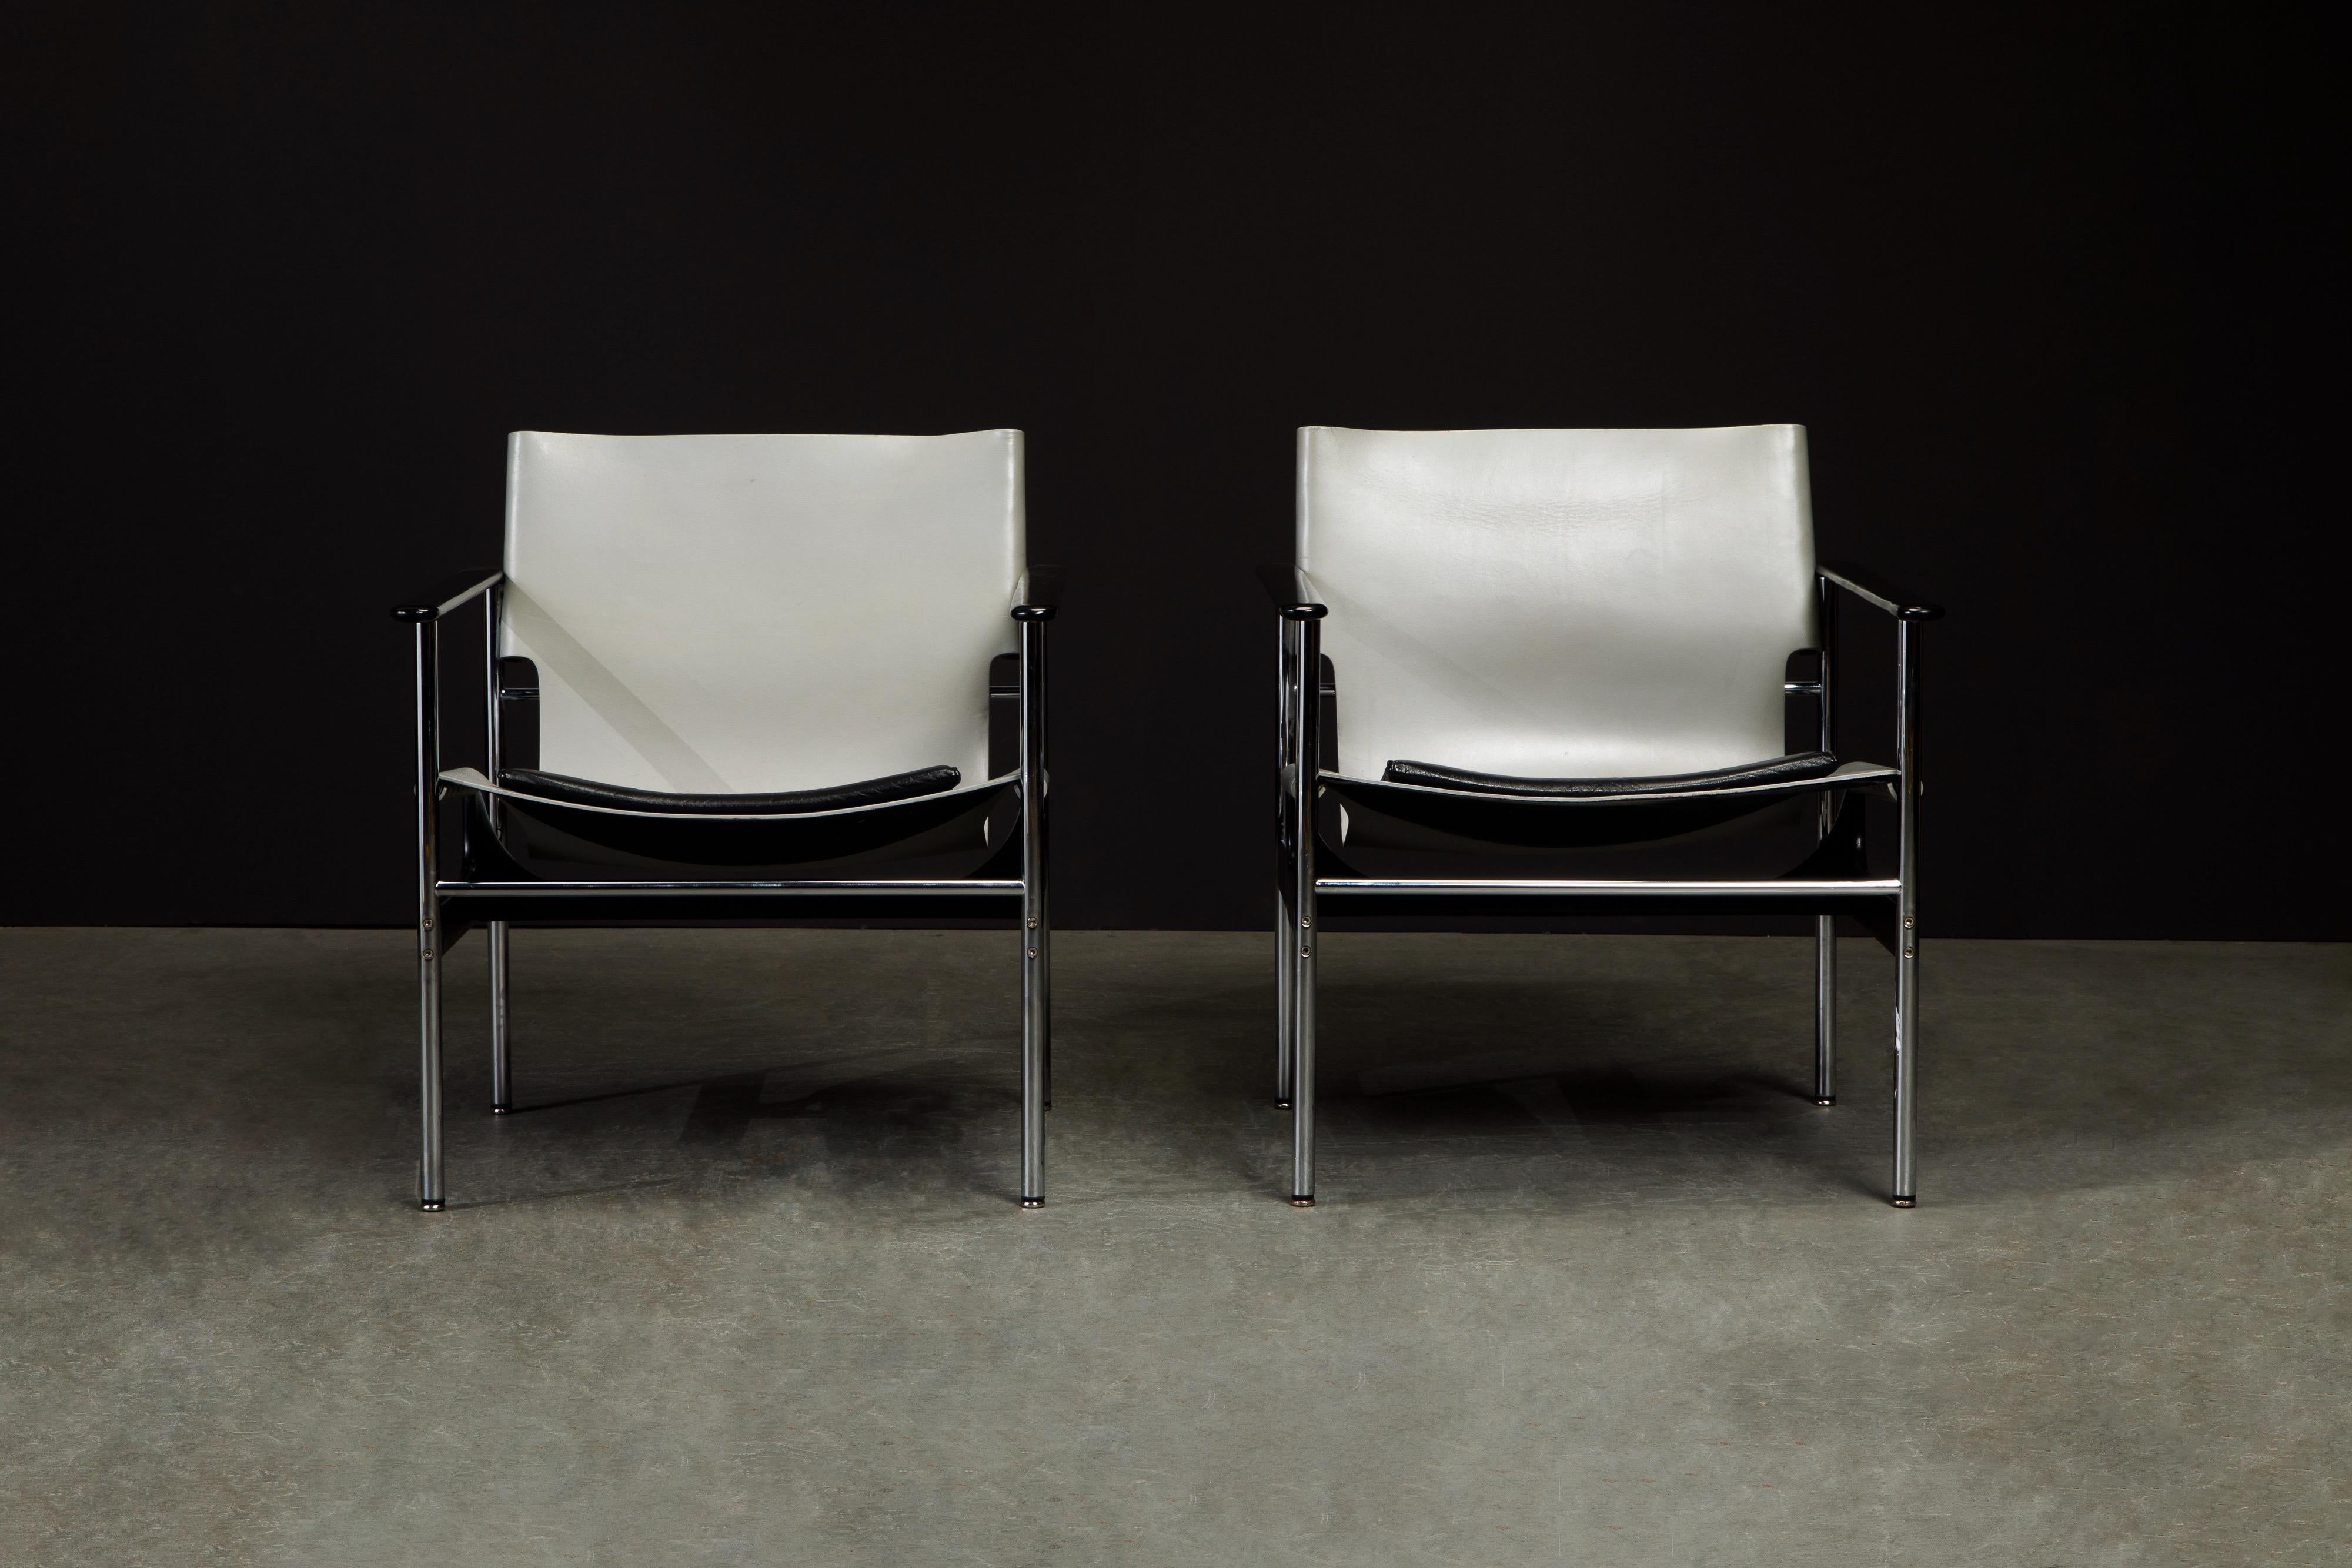 A fantastic pair of early year production examples of the '657' armchair by Charles Pollock for Knoll International, signed with a Knoll International label under the seat cushion as seen in the photos. Rare color combination of gray and black